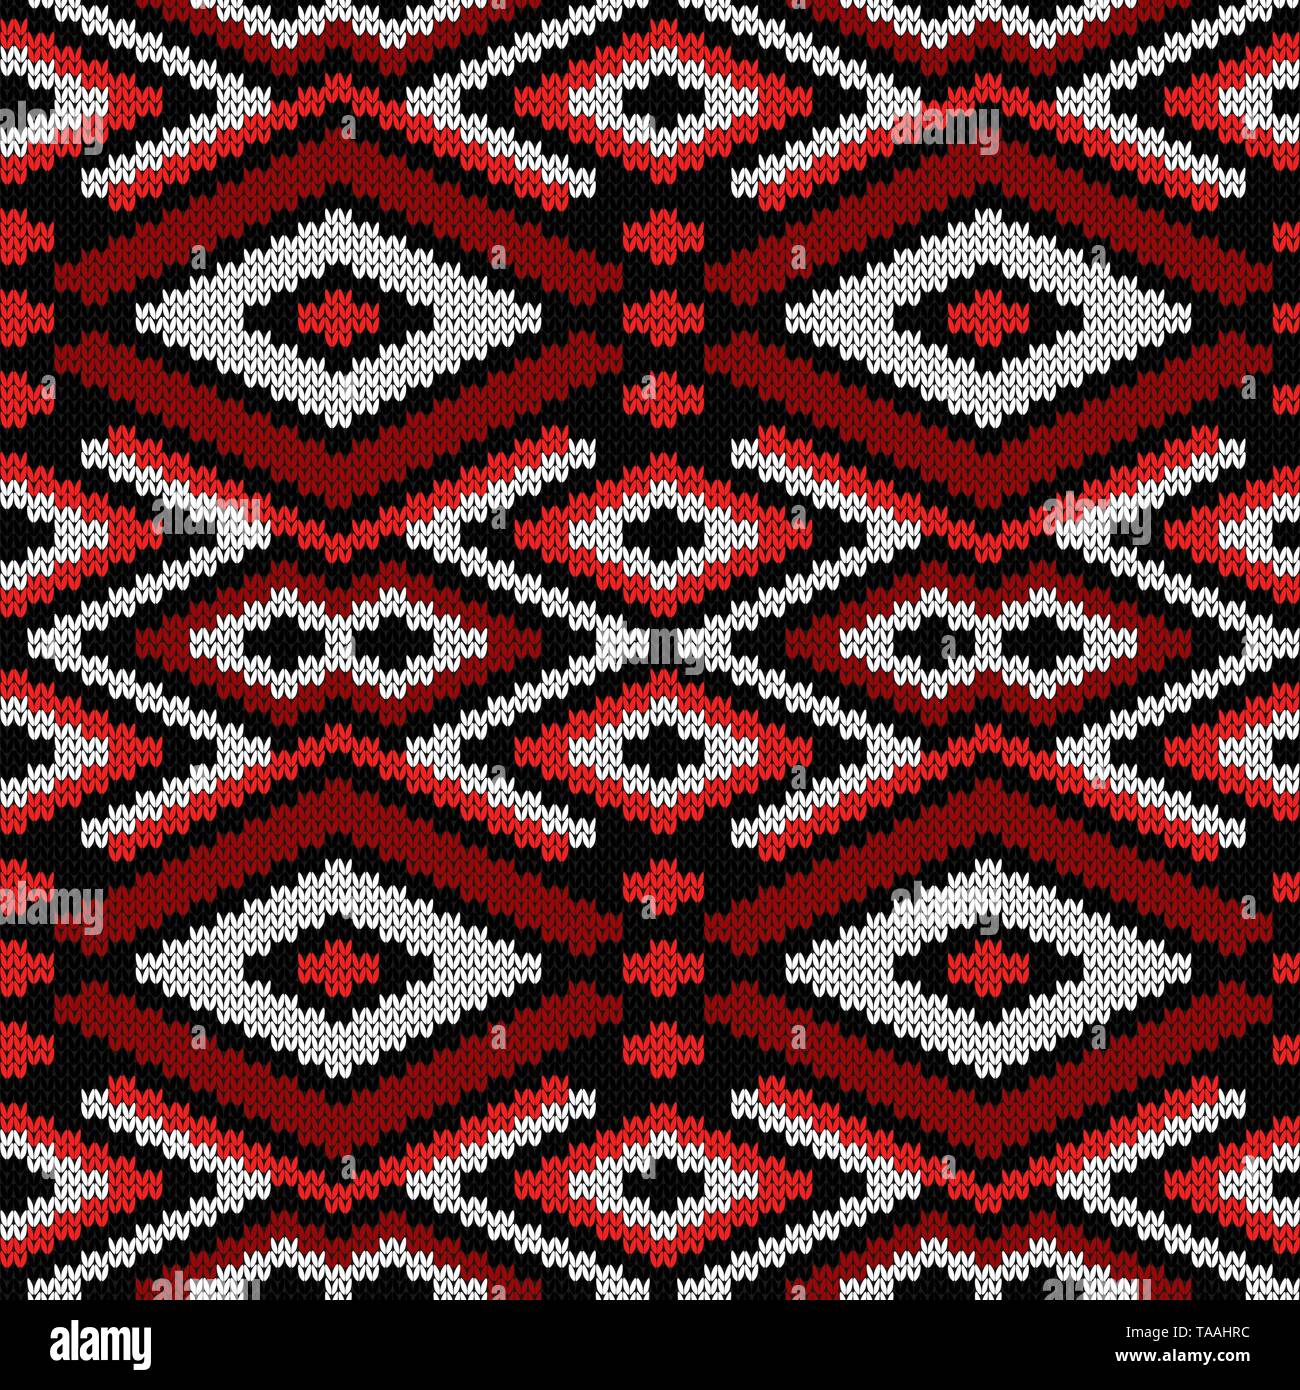 Knitting seamless vector pattern as a fabric texture in black, red and white color as a fabric texture Stock Vector